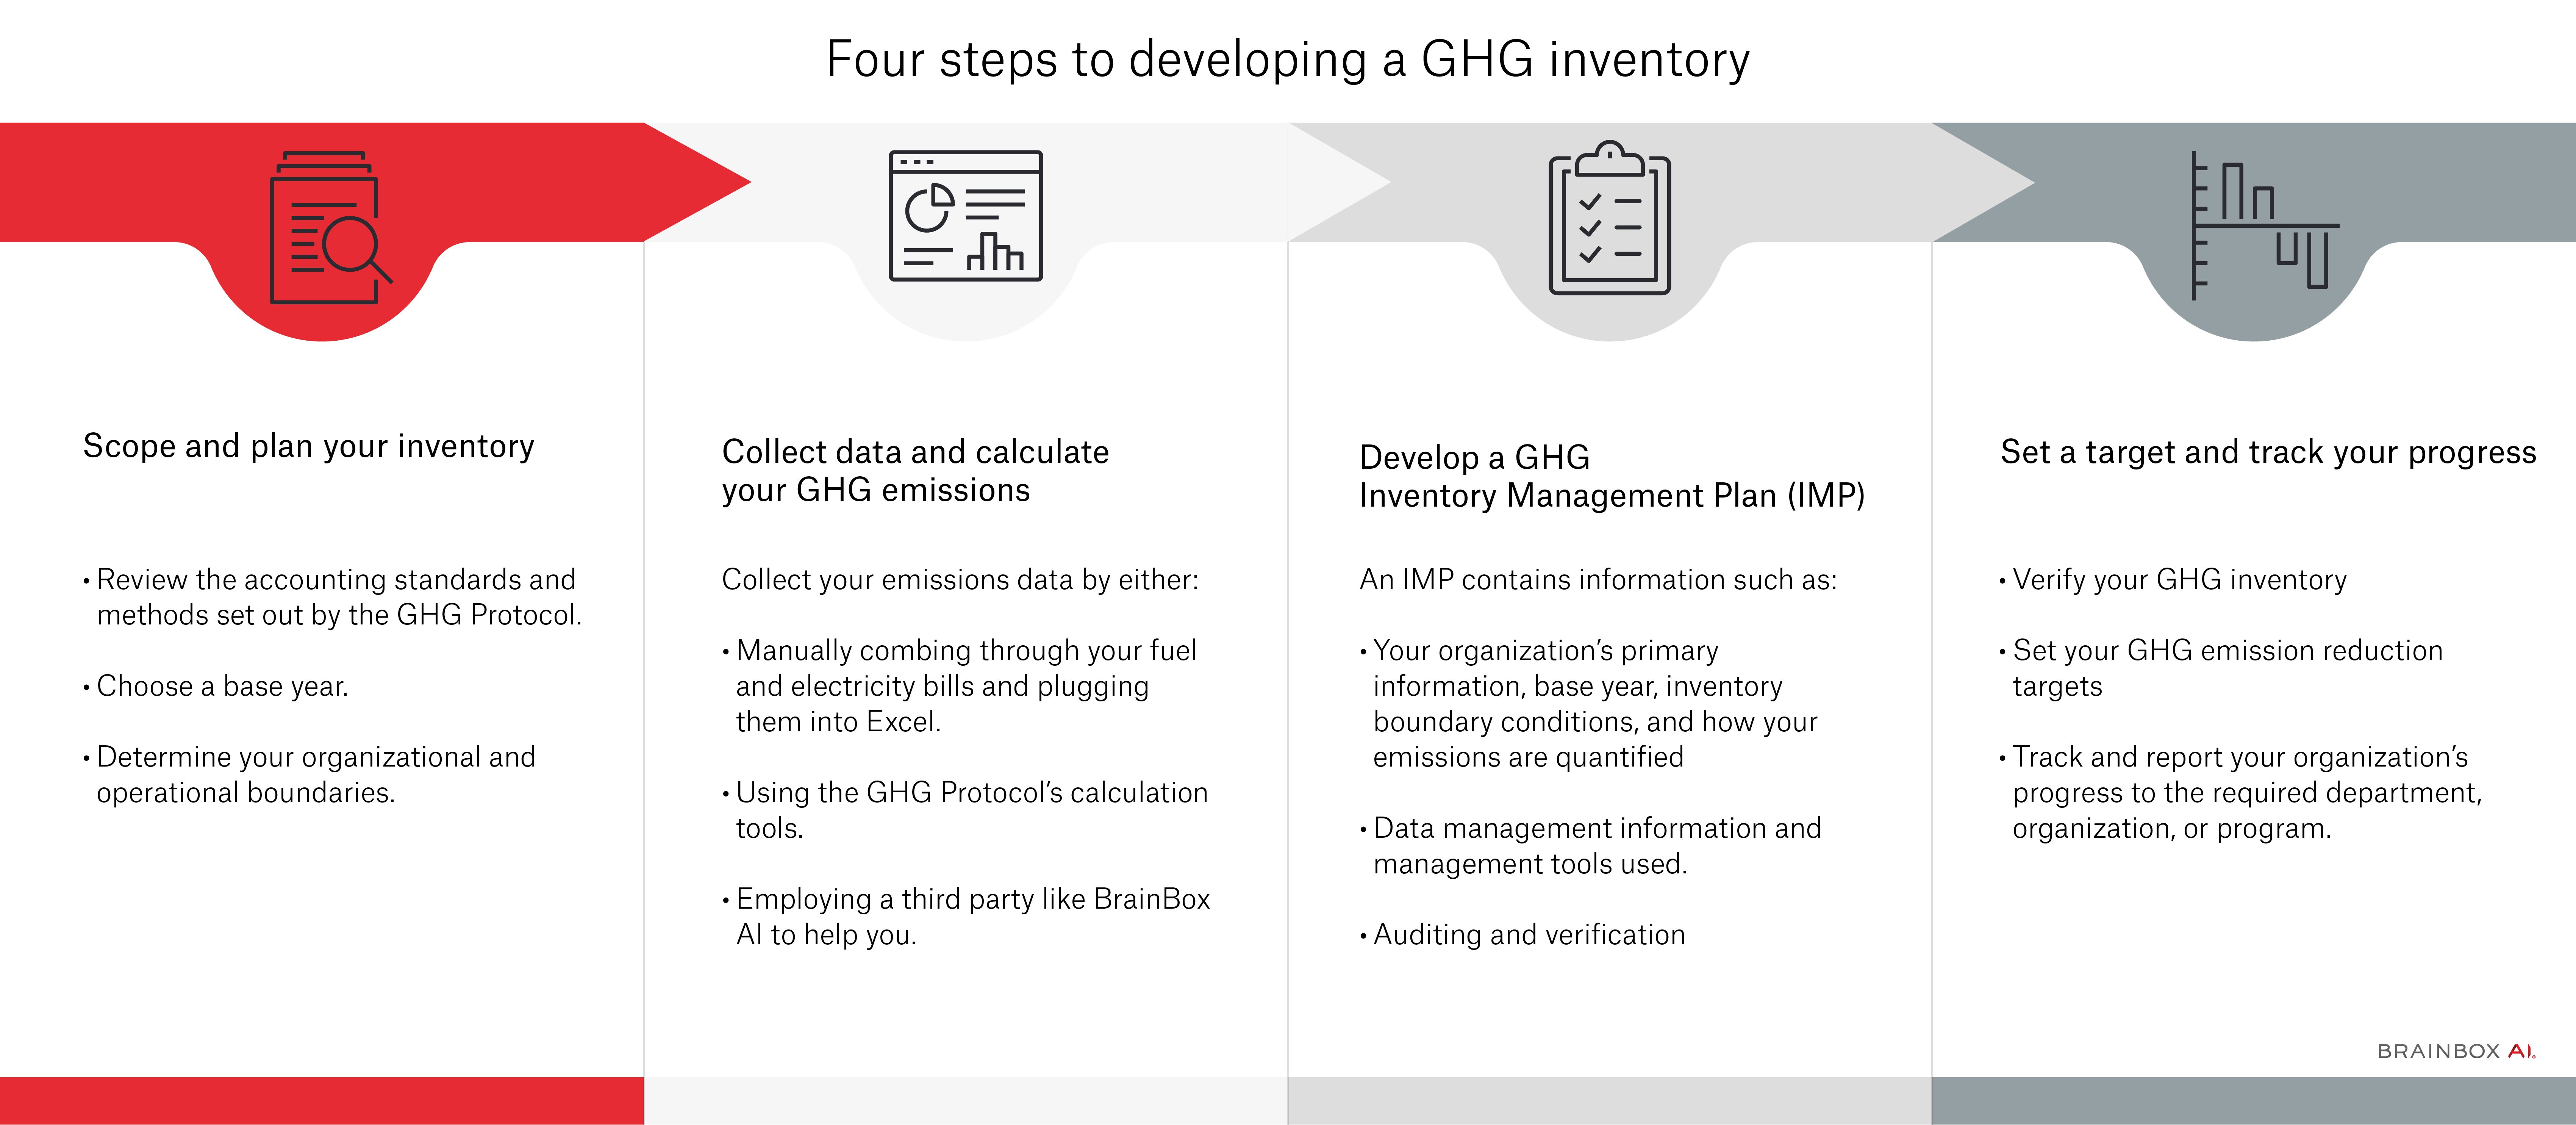 GHG Emissions-4-Steps-To-Developing-A-GHG-Inventory